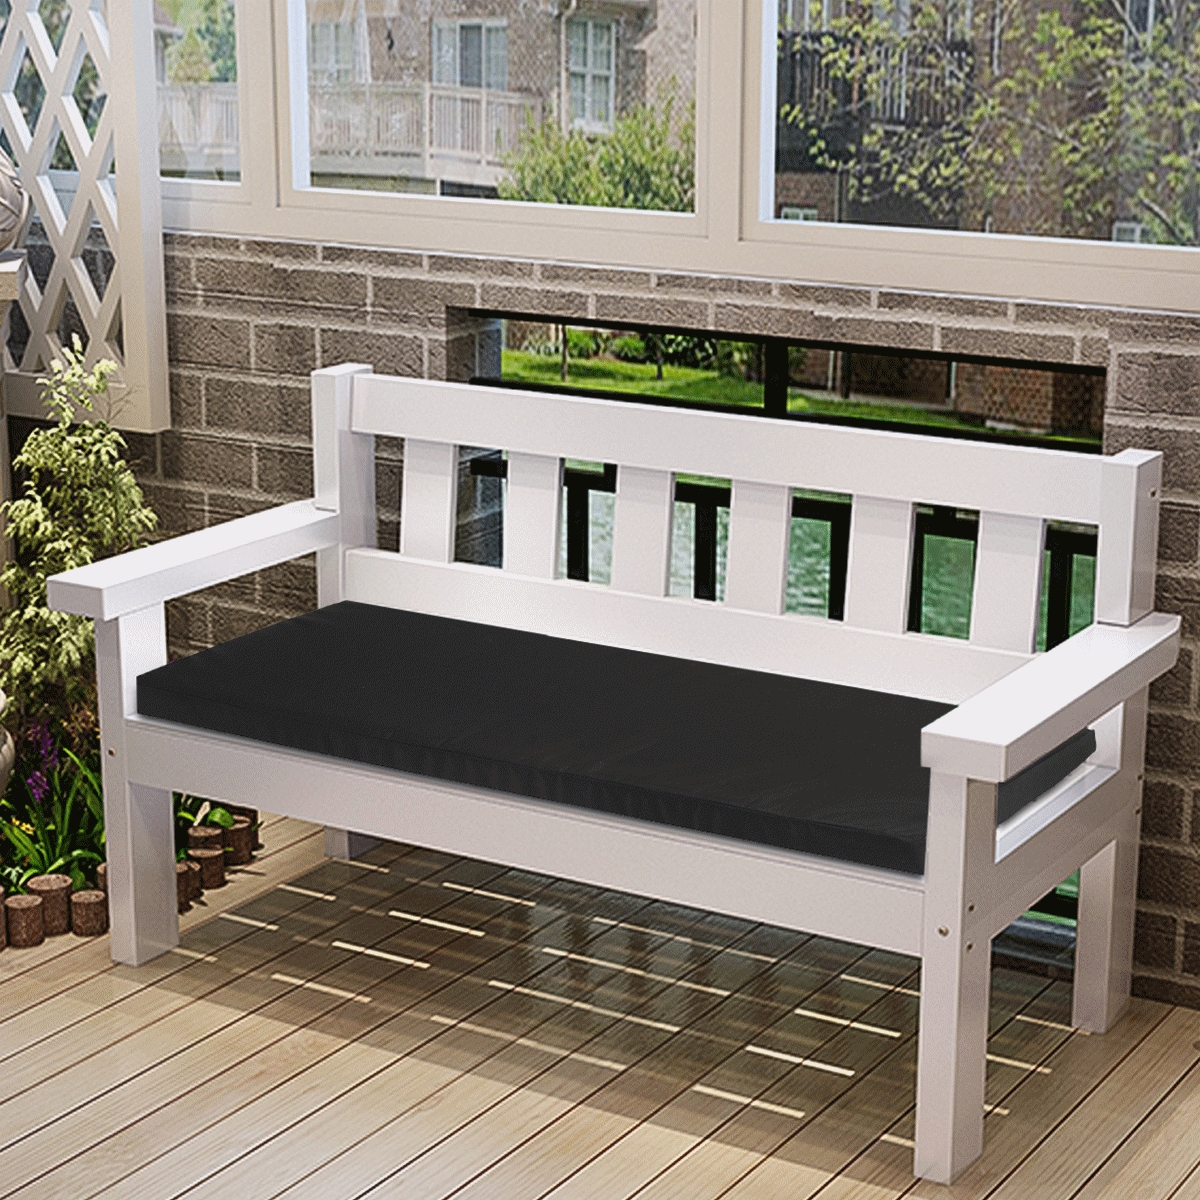 Outdoor Waterproof 2 Seater Bench Swing Seat Garden Furniture Pad Cushion ONLY 